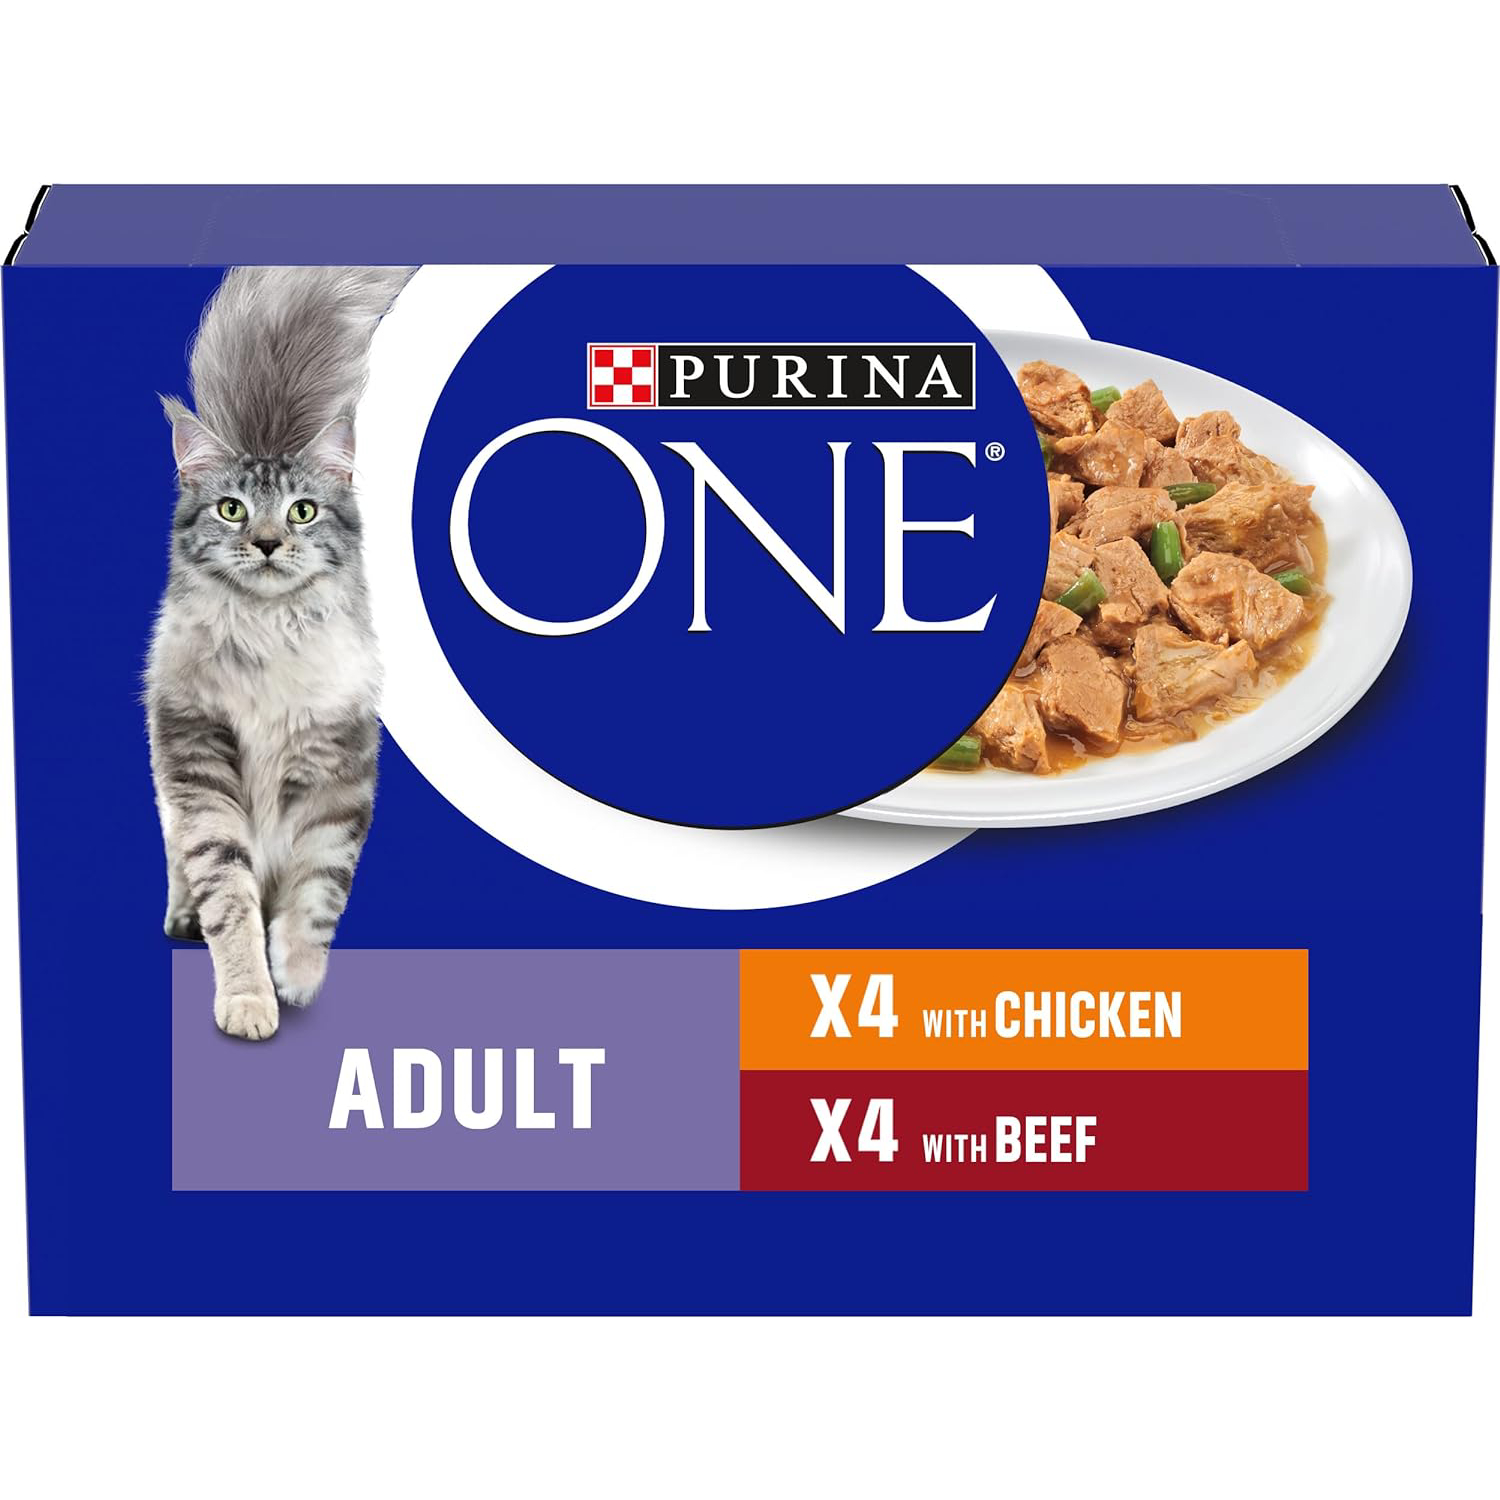 Purina ONE Adult Cat Food Chicken and Beef